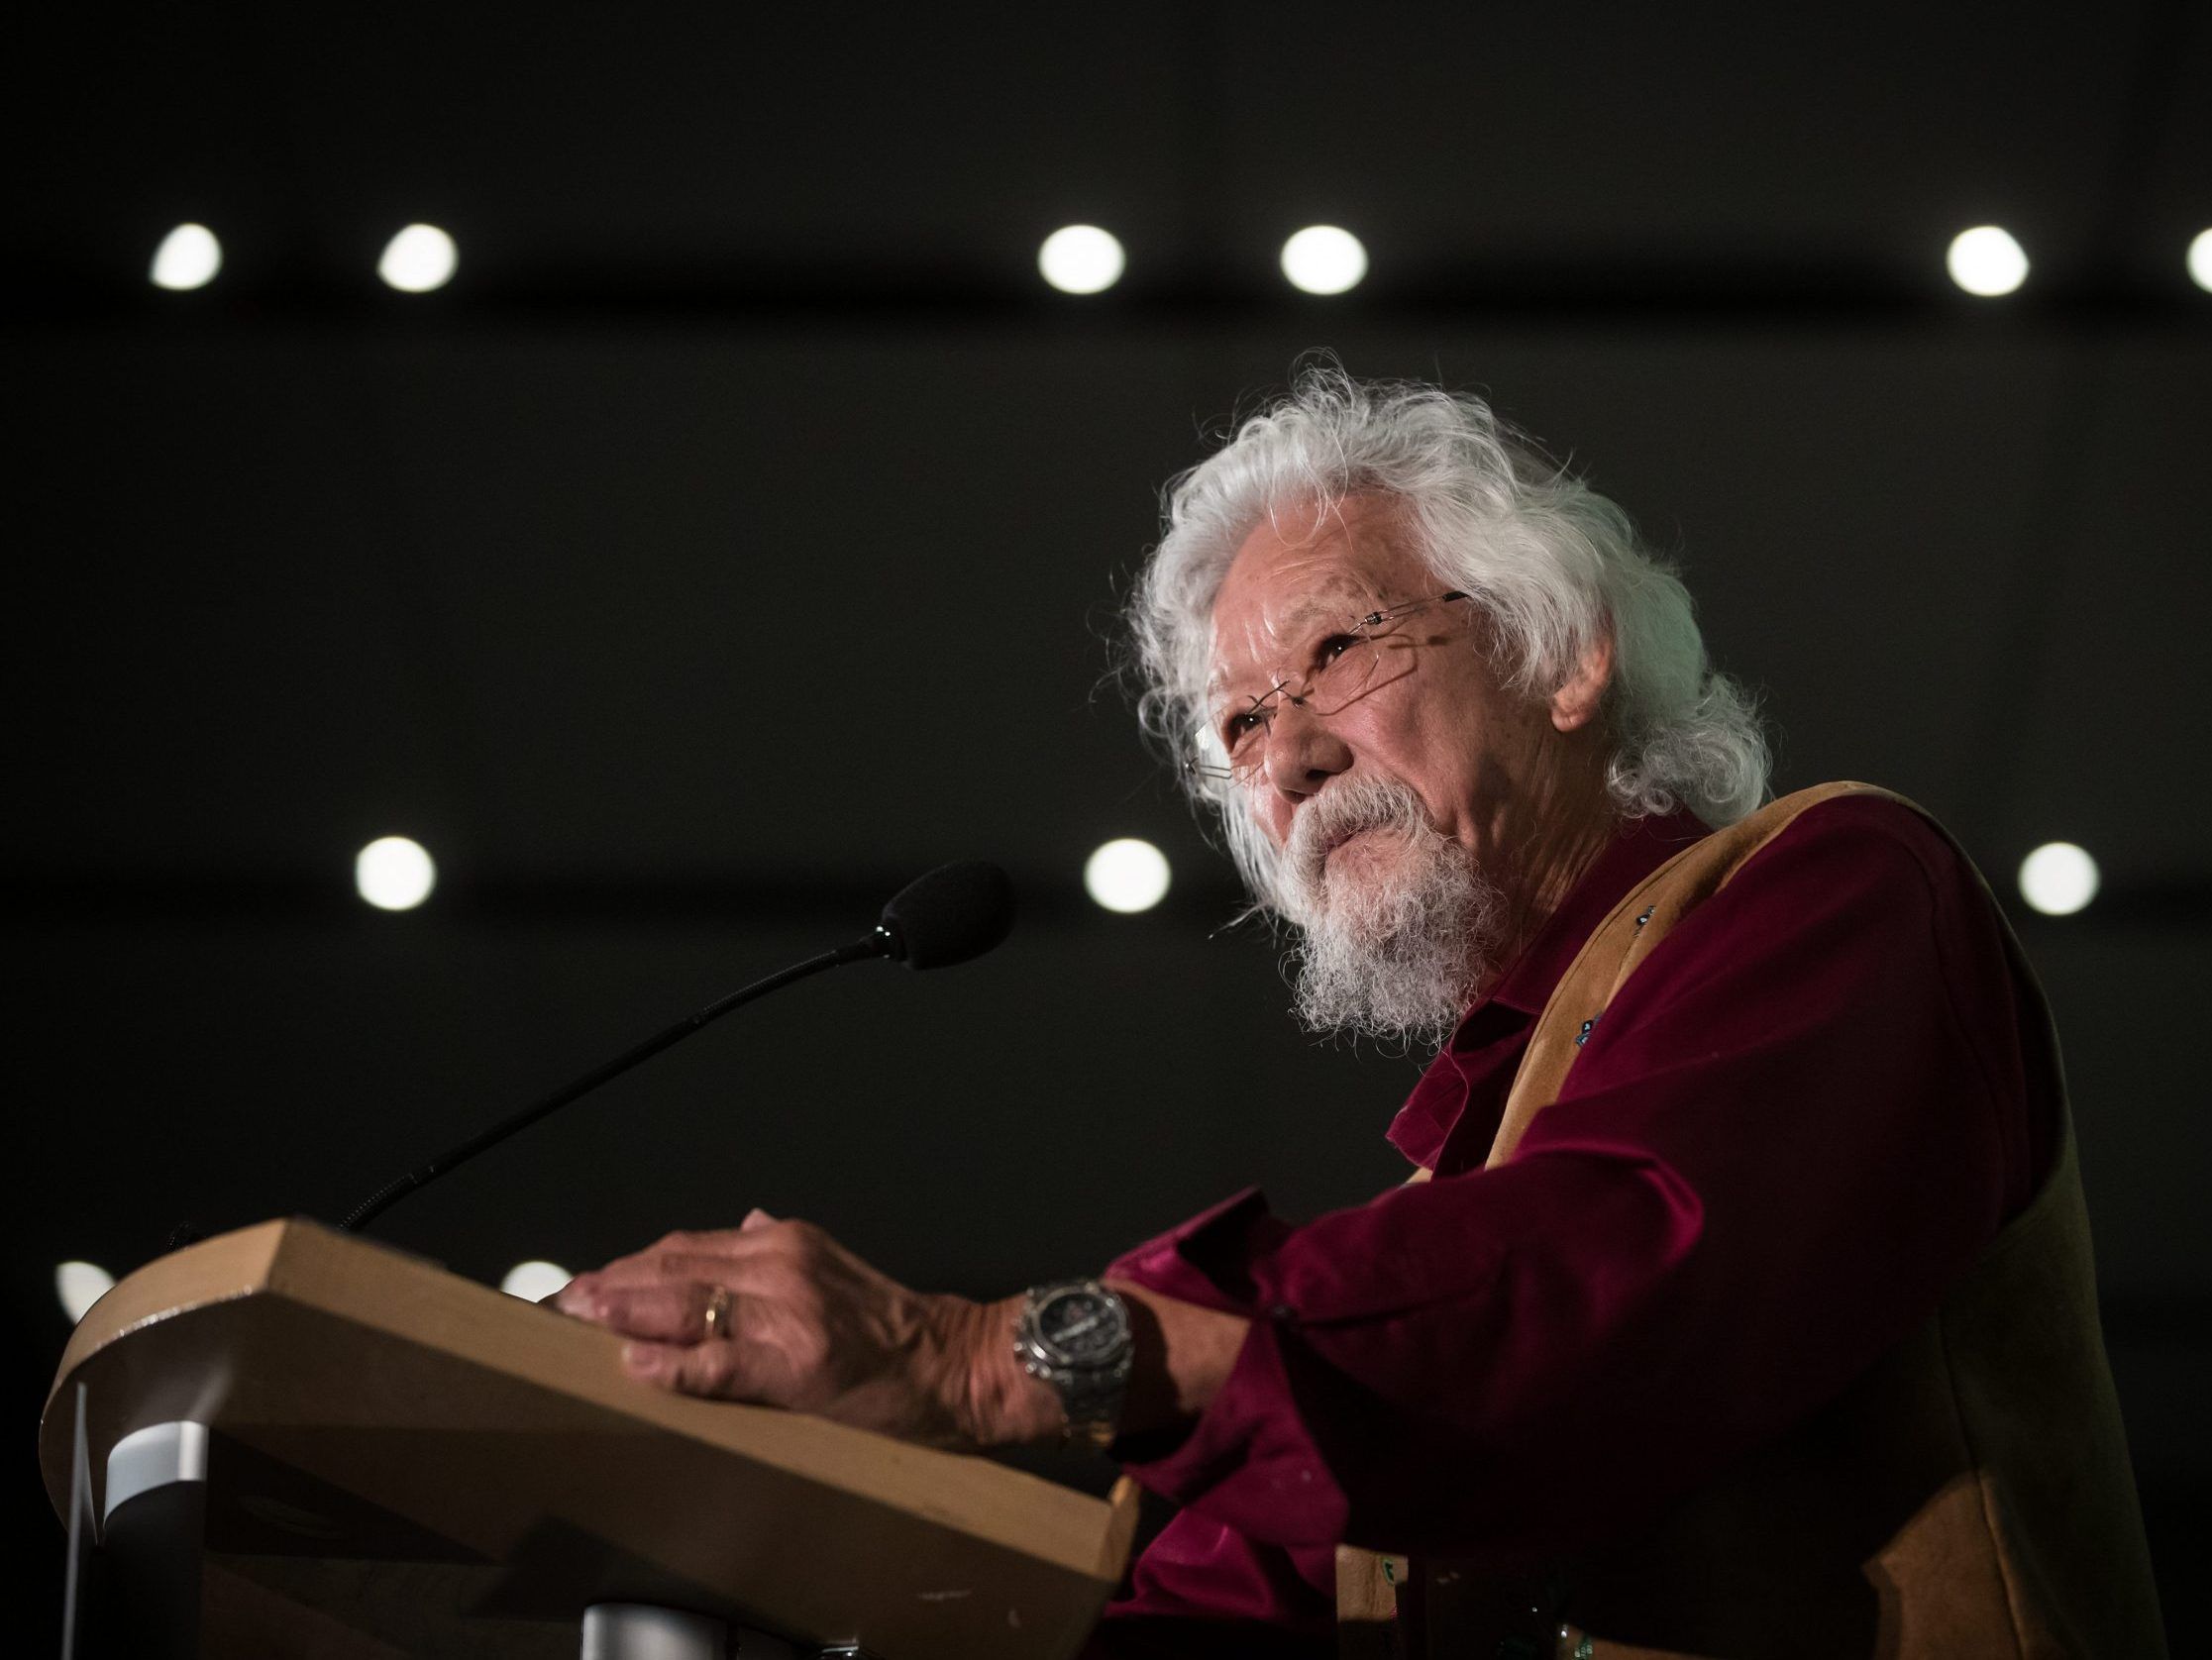 'Pipelines will be blown up,' says David Suzuki, if leaders don't act on climate change